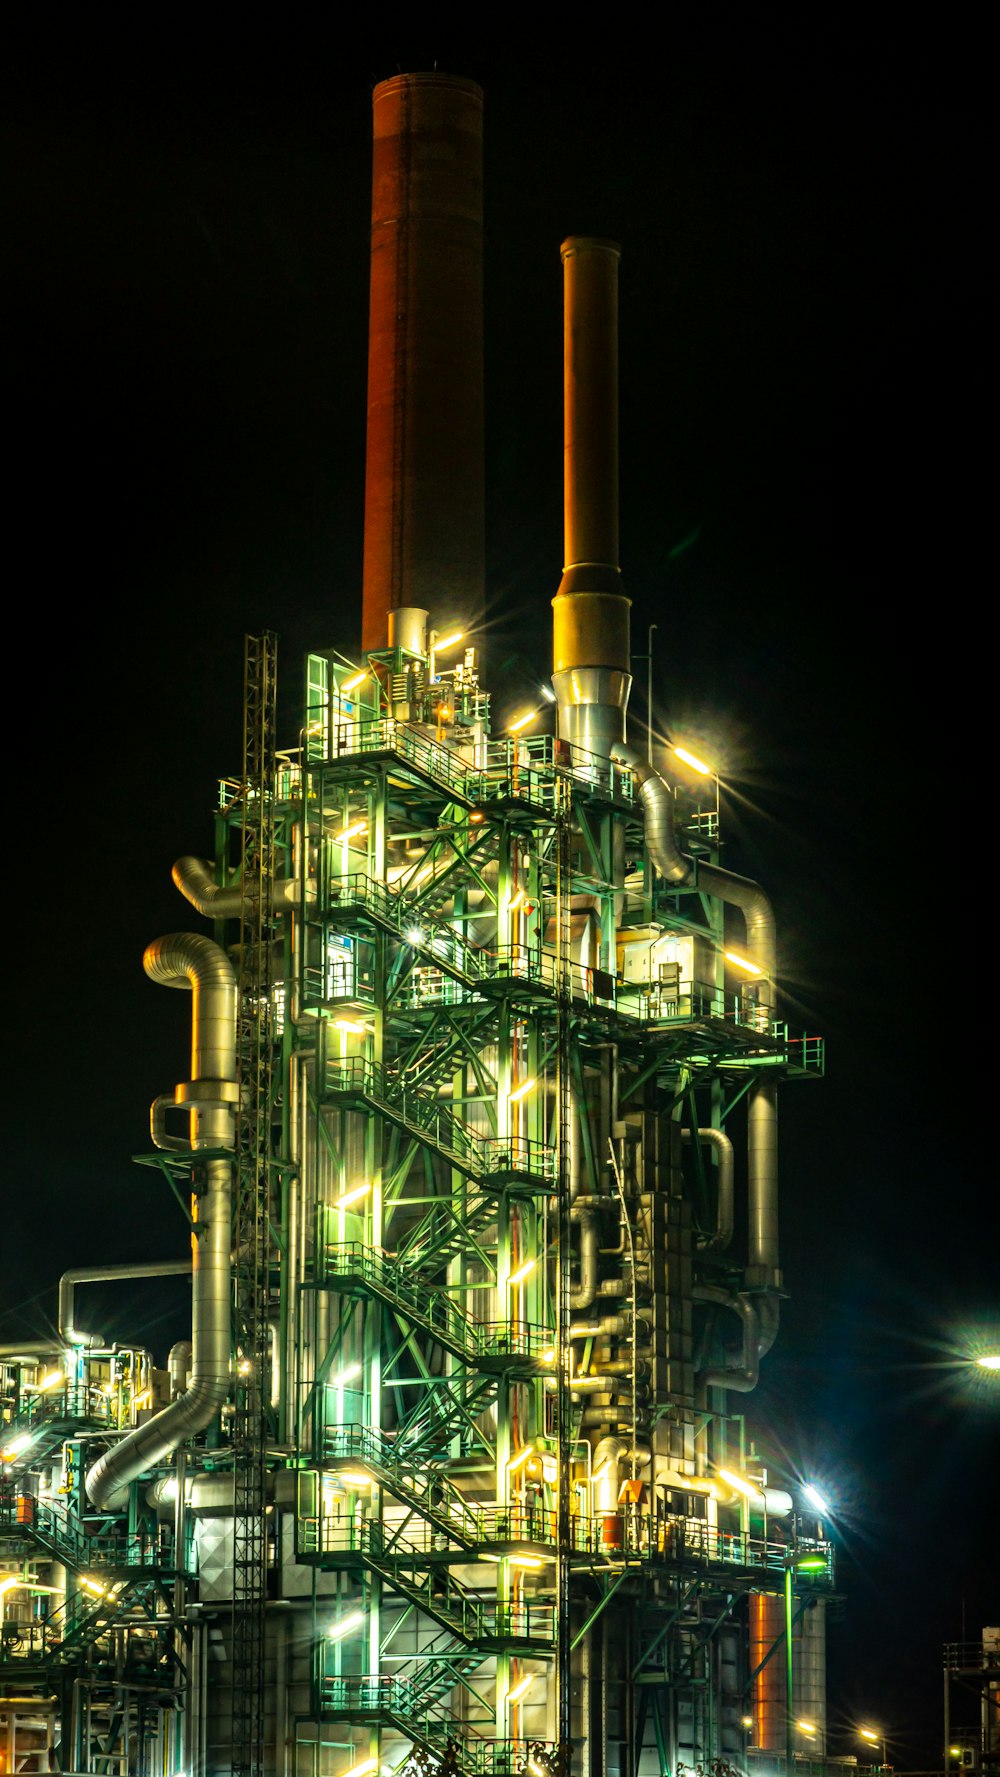 brown and black factory during night time